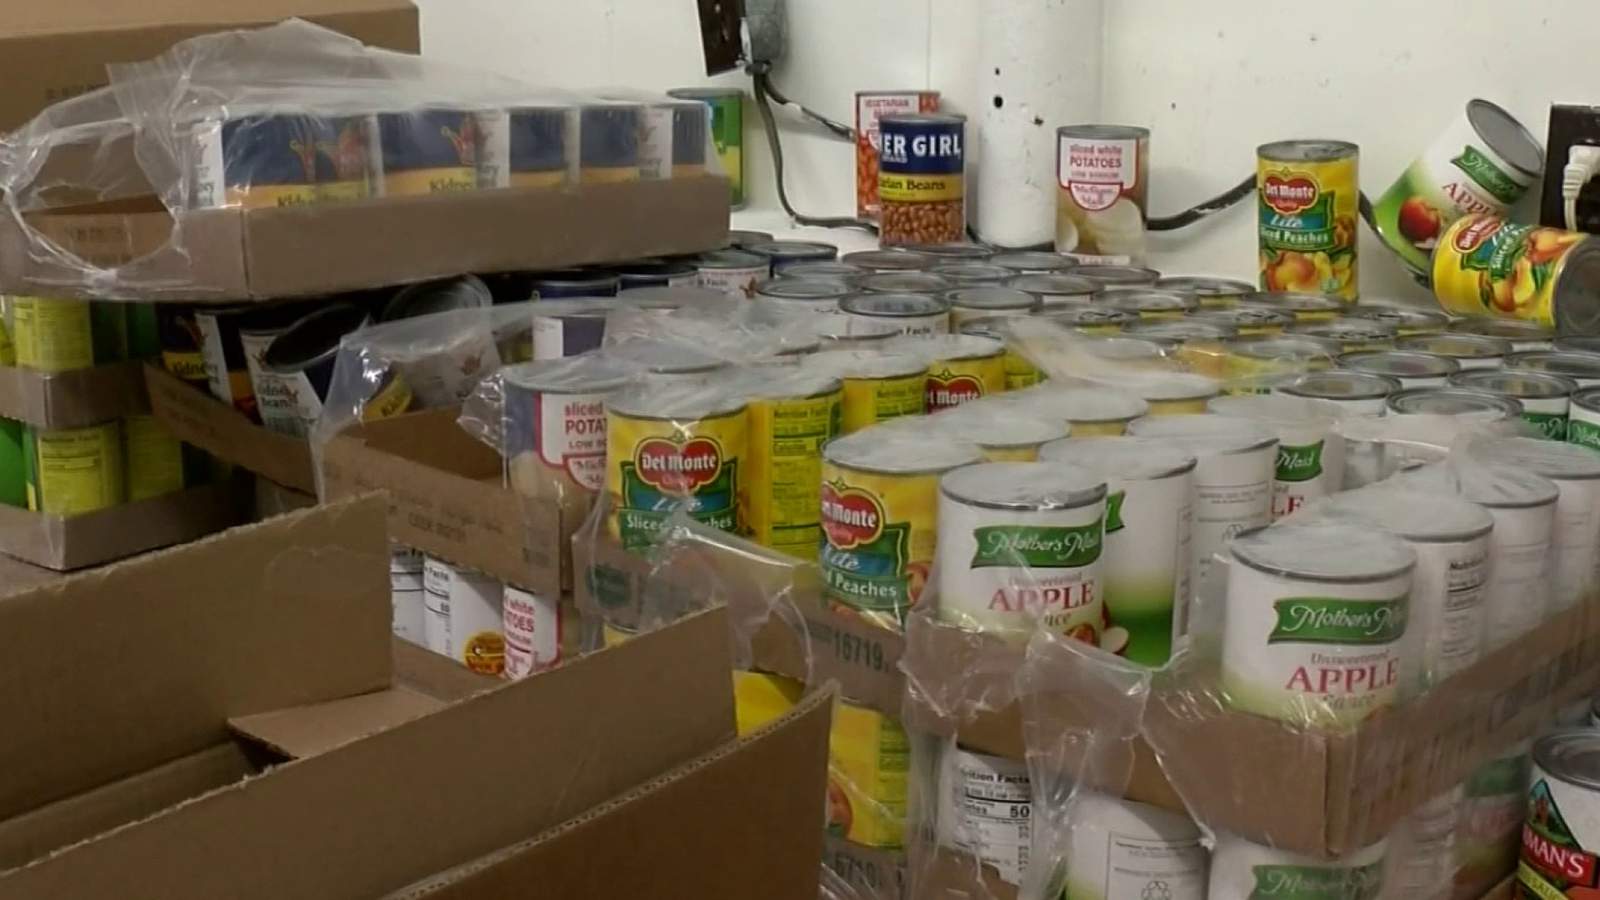 Calling all volunteers: Franklin County food banks in jeopardy without more volunteers